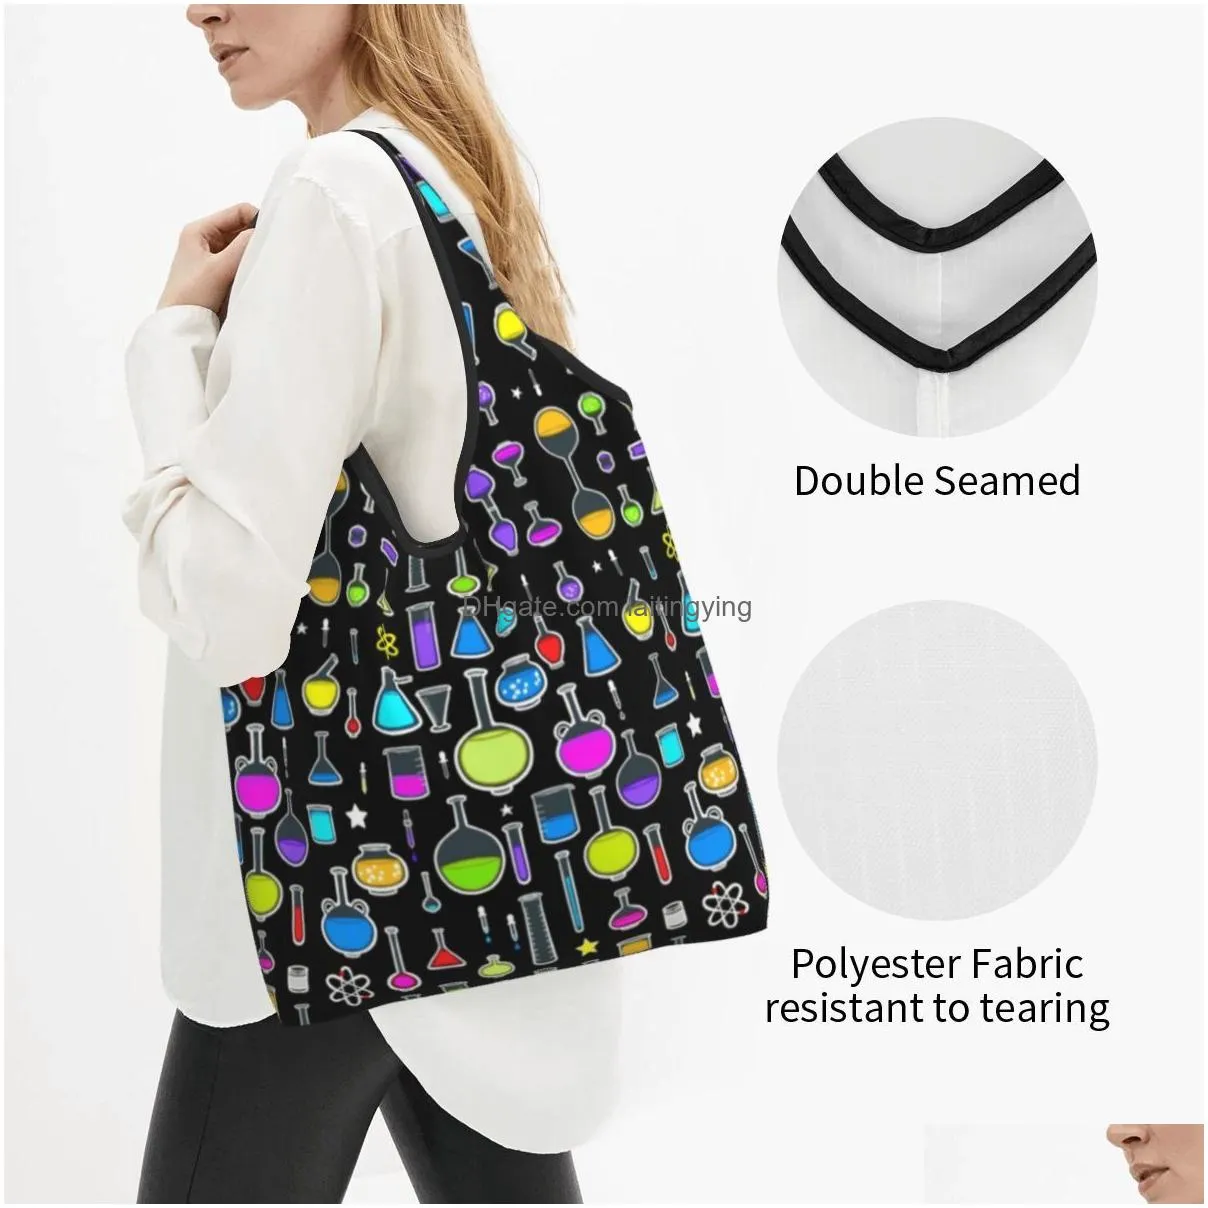 Other Maternity Supplies Kawaii Printed Beakers Laboratory Technology Shop Tote Bags Portable Shoder Shopper Science Chemistry Handb Dh4Gi